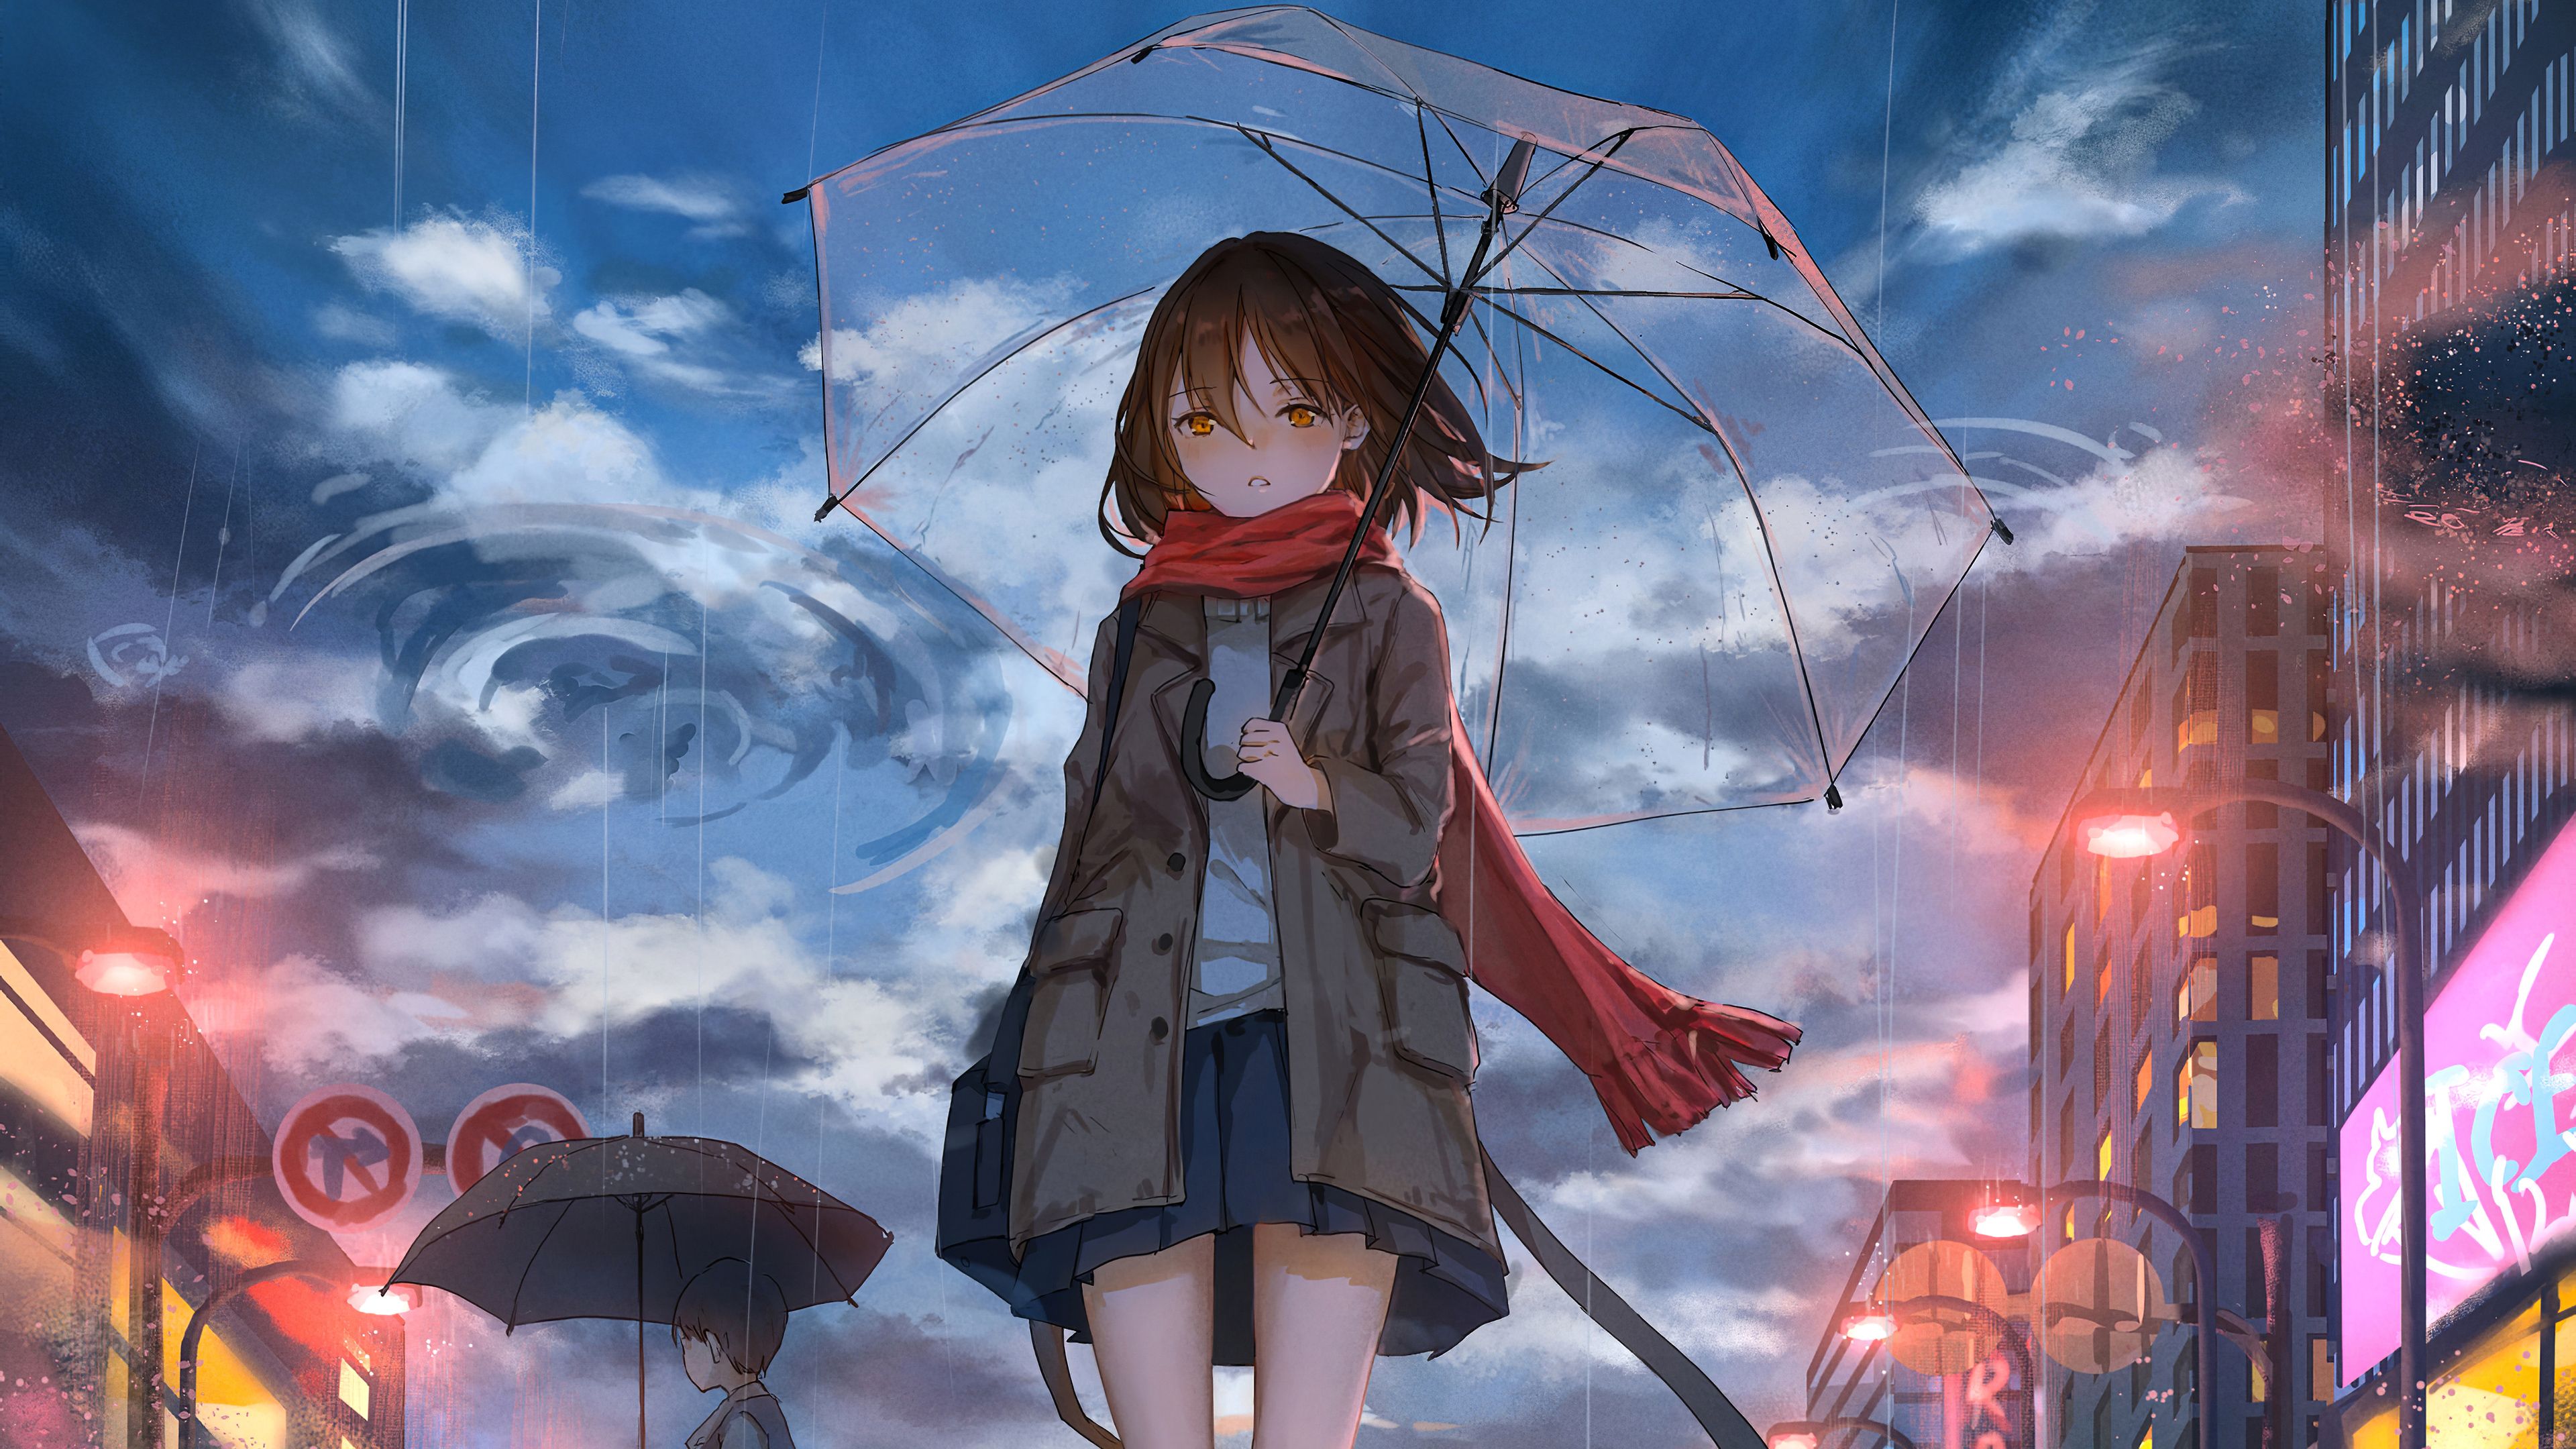 Anime Girl Walking In Rain With Umbrella 4k, HD Anime, 4k Wallpaper, Image, Background, Photo and Picture